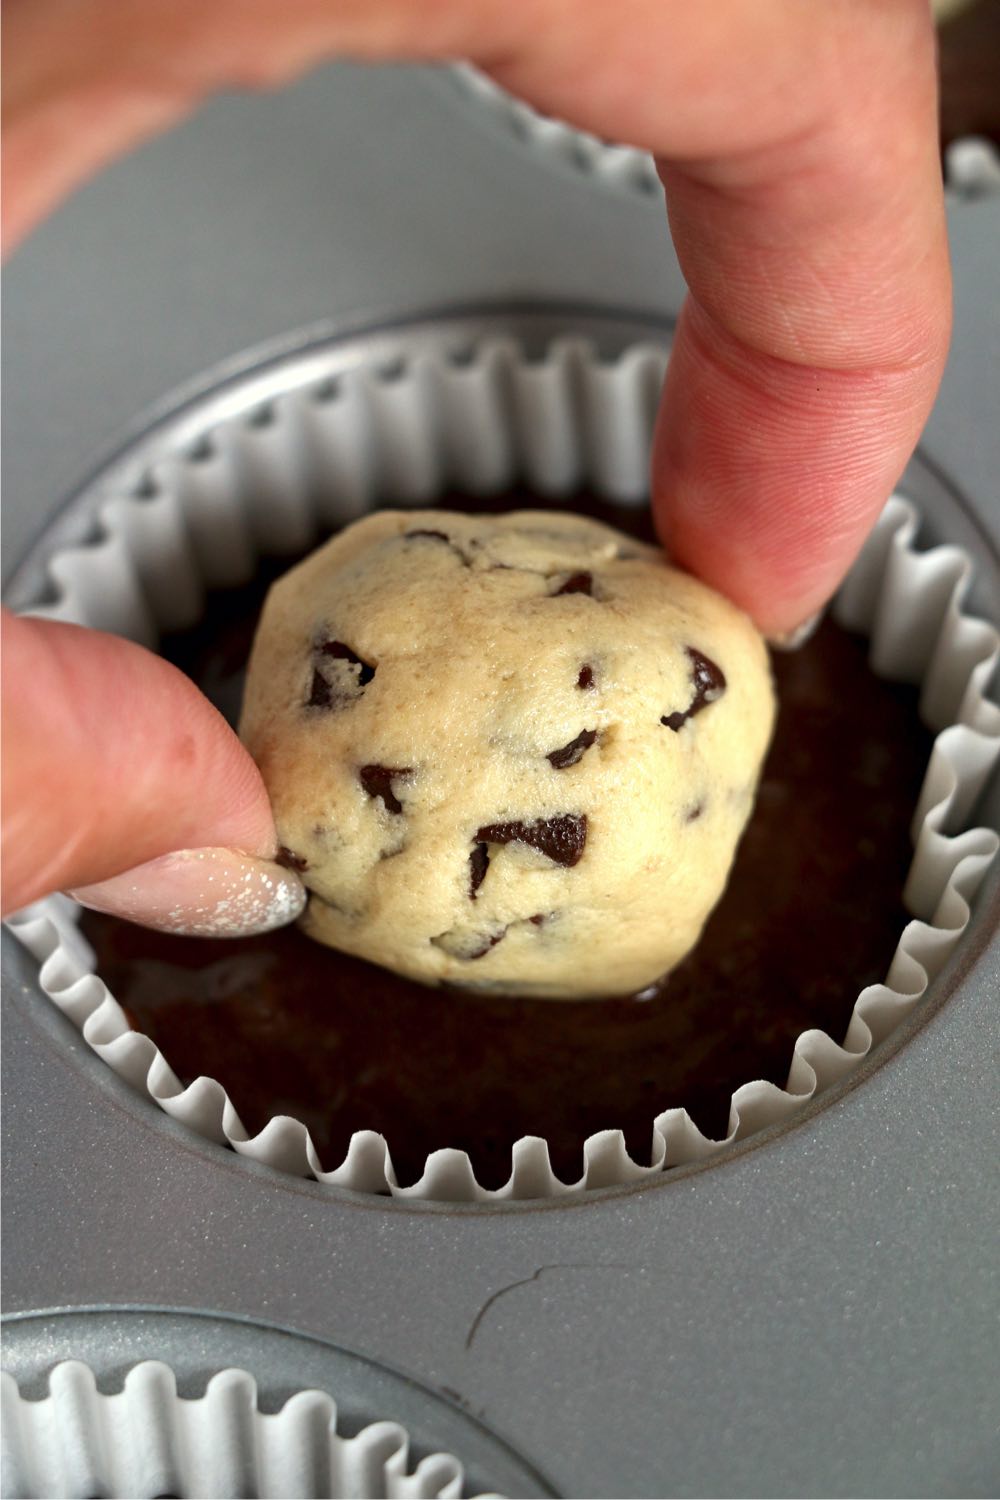 placing a ball of cookie dough on top of a cupcake